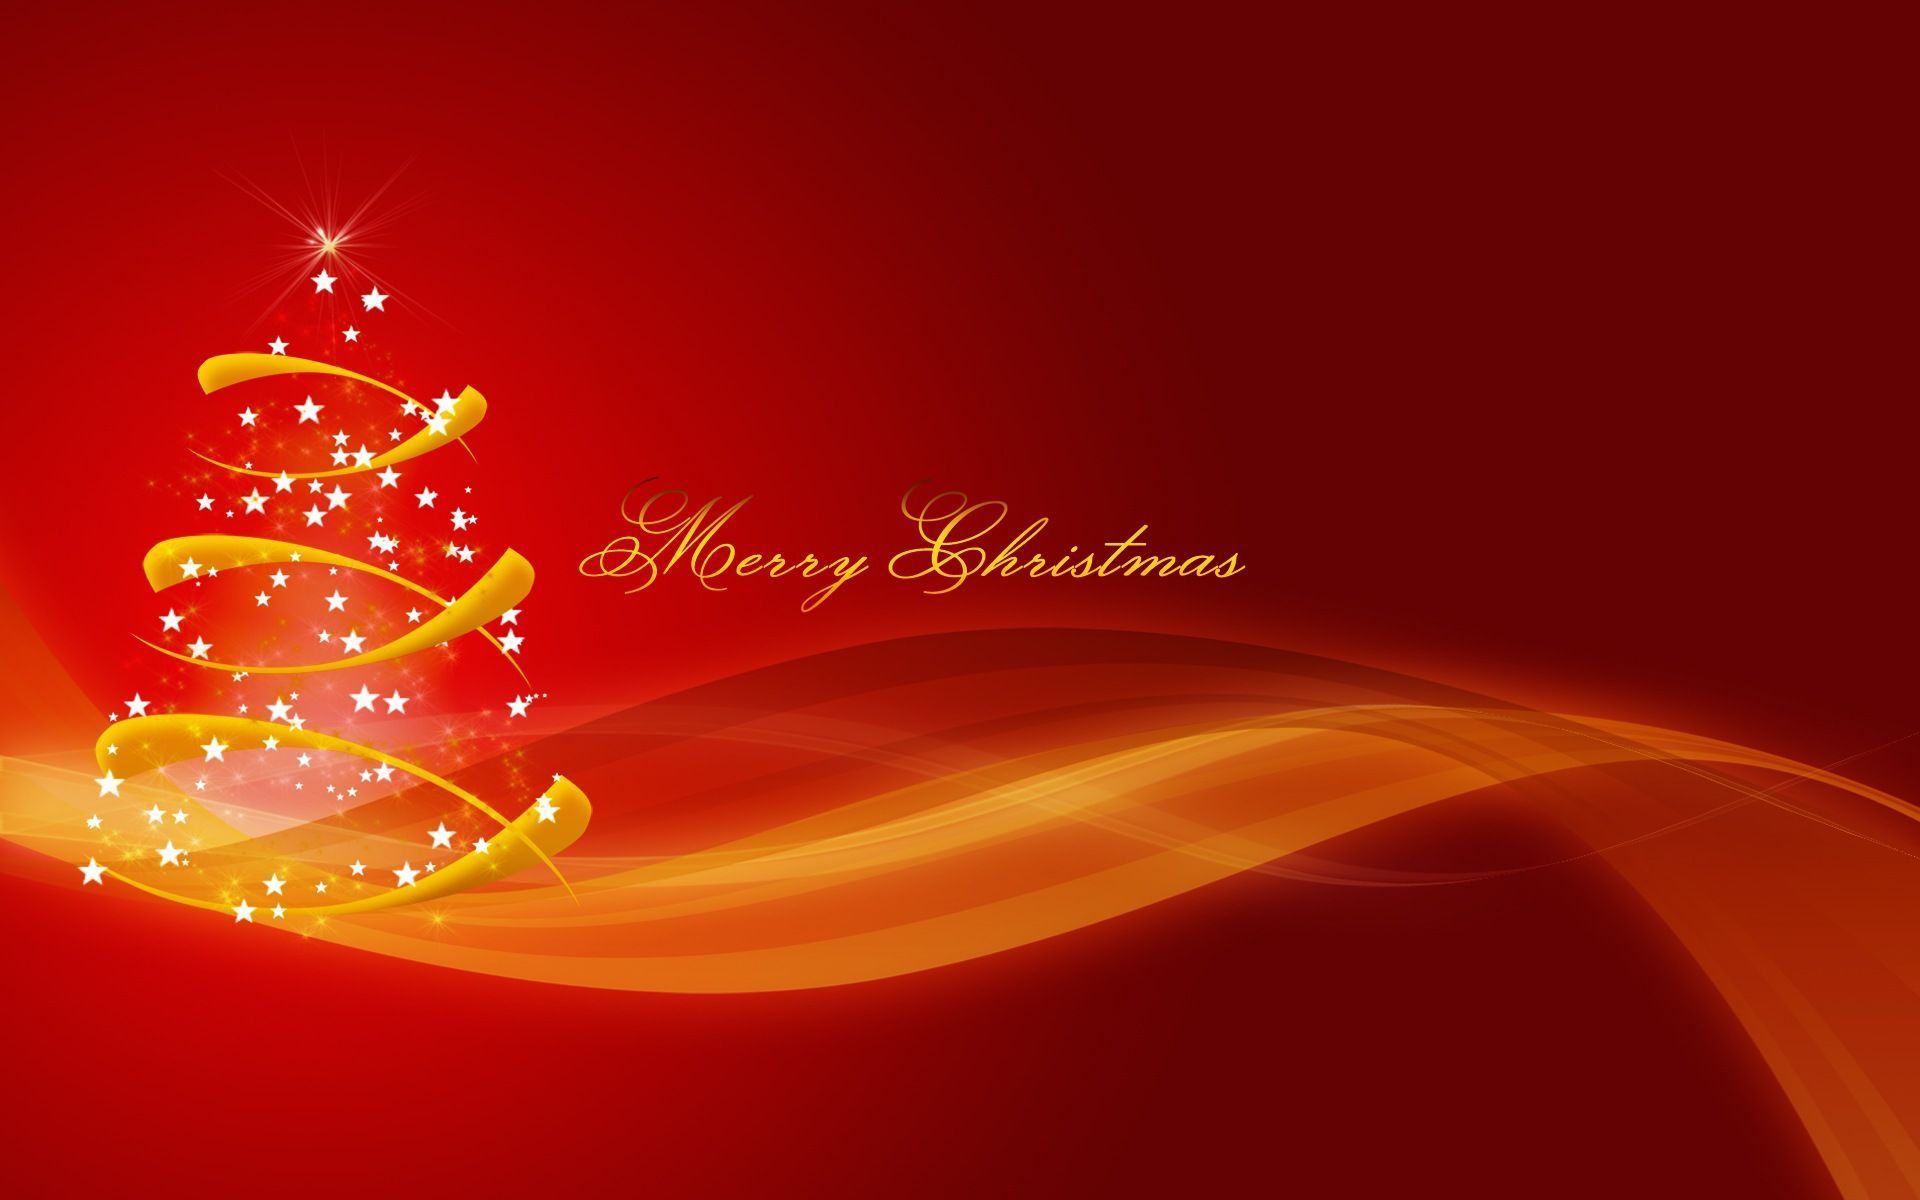 Merry Christmas wallpapers red 2015 free download | Wallpapers ...